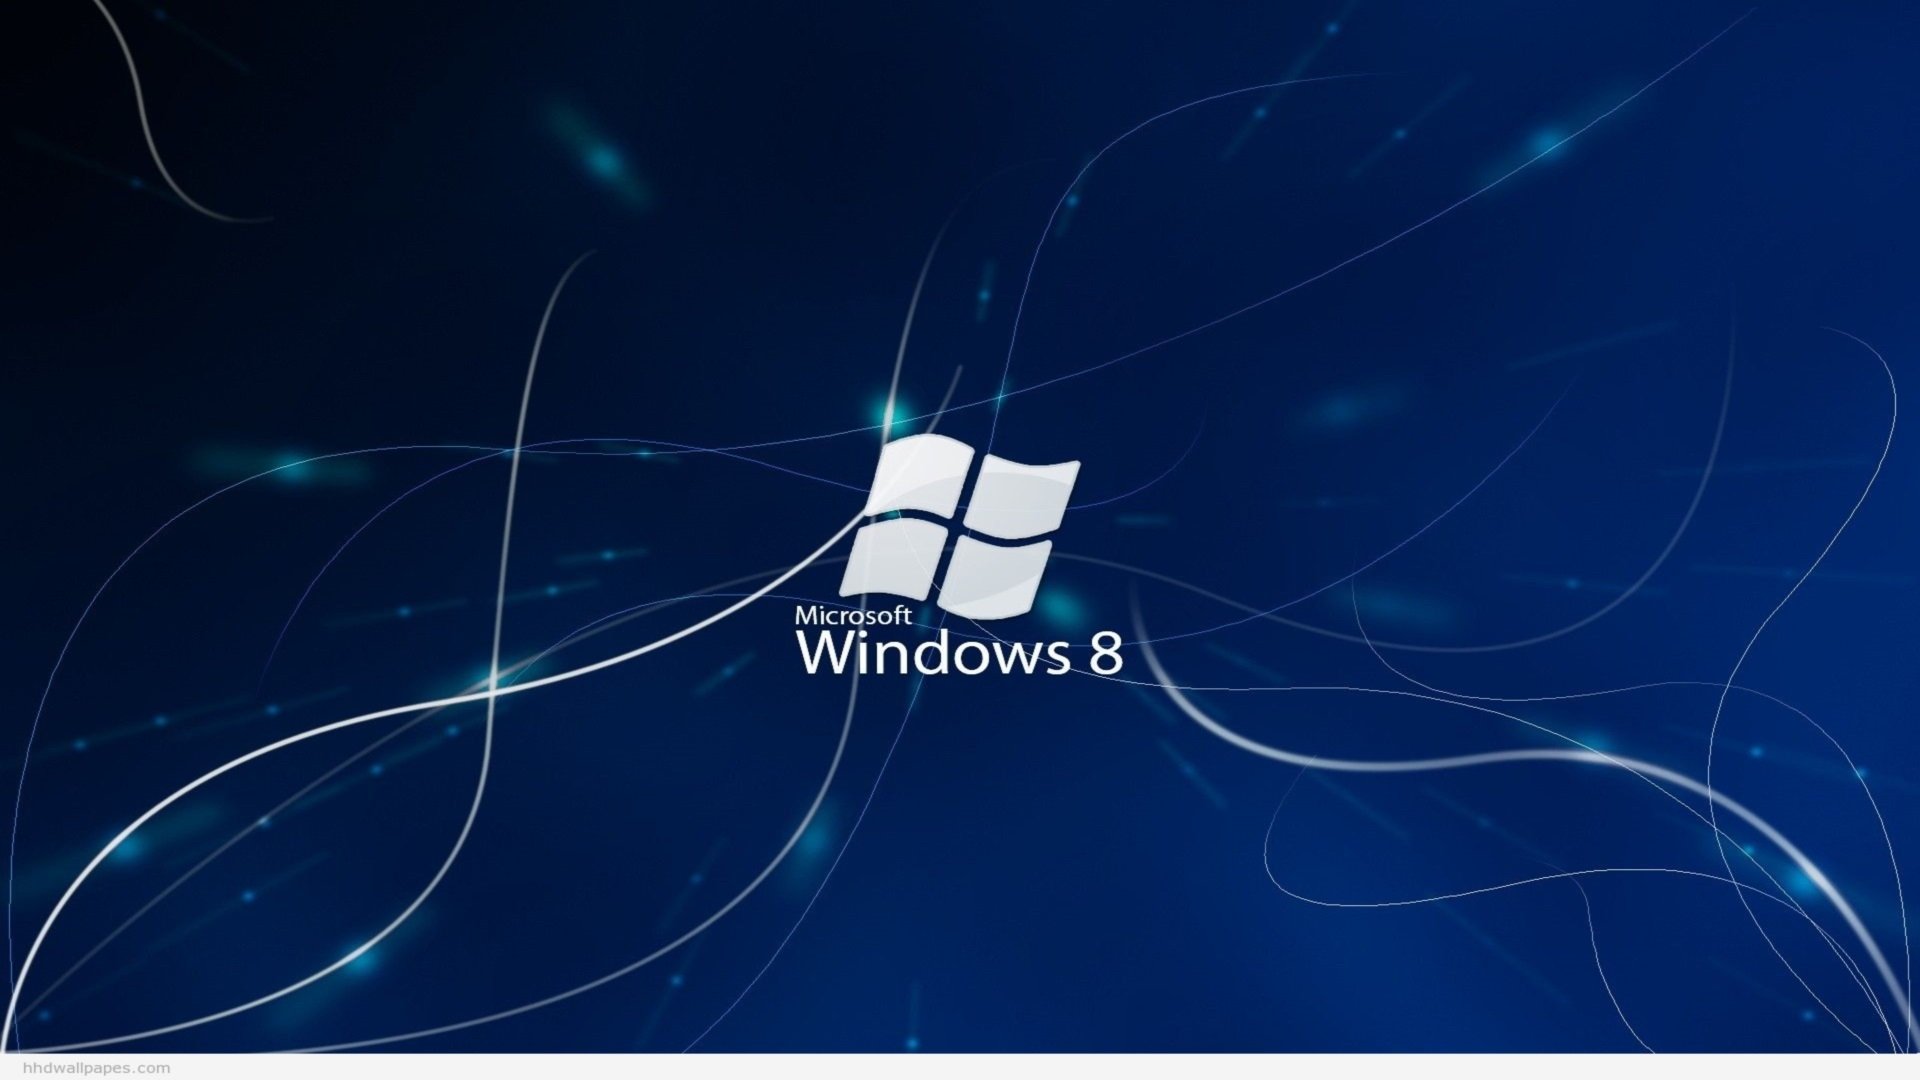 Windows 8 download the new